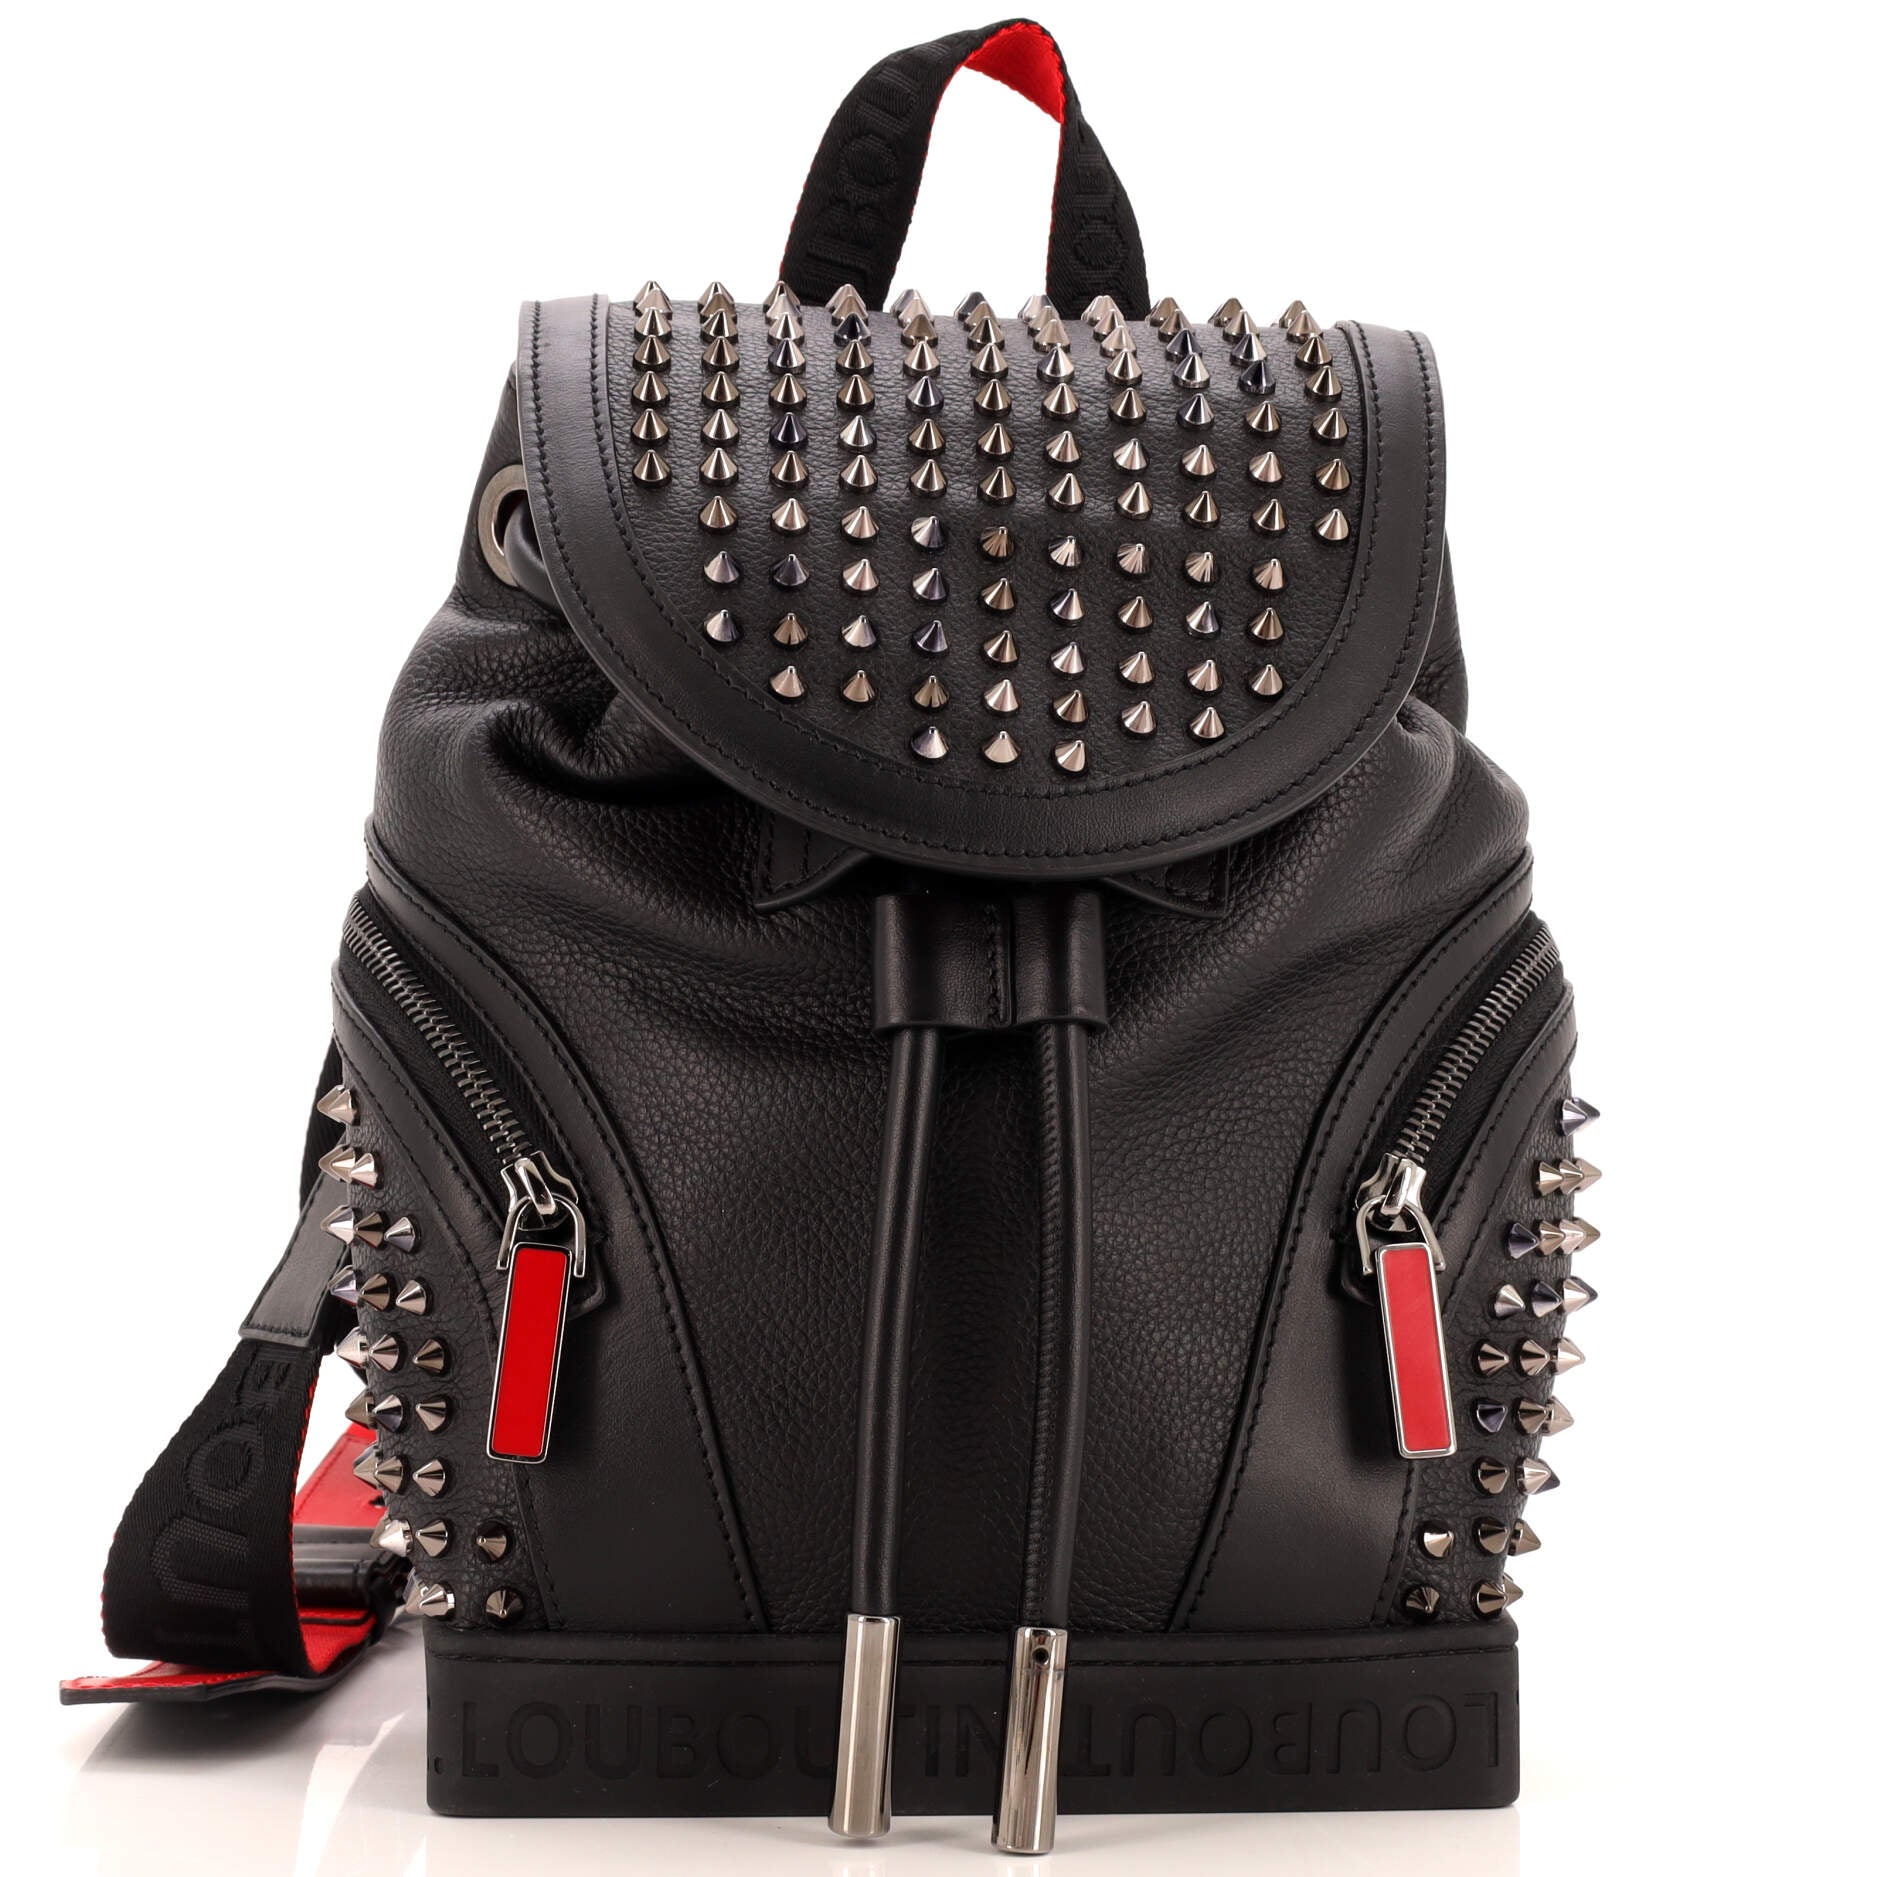 Explorafunk Backpack Spiked Leather Small